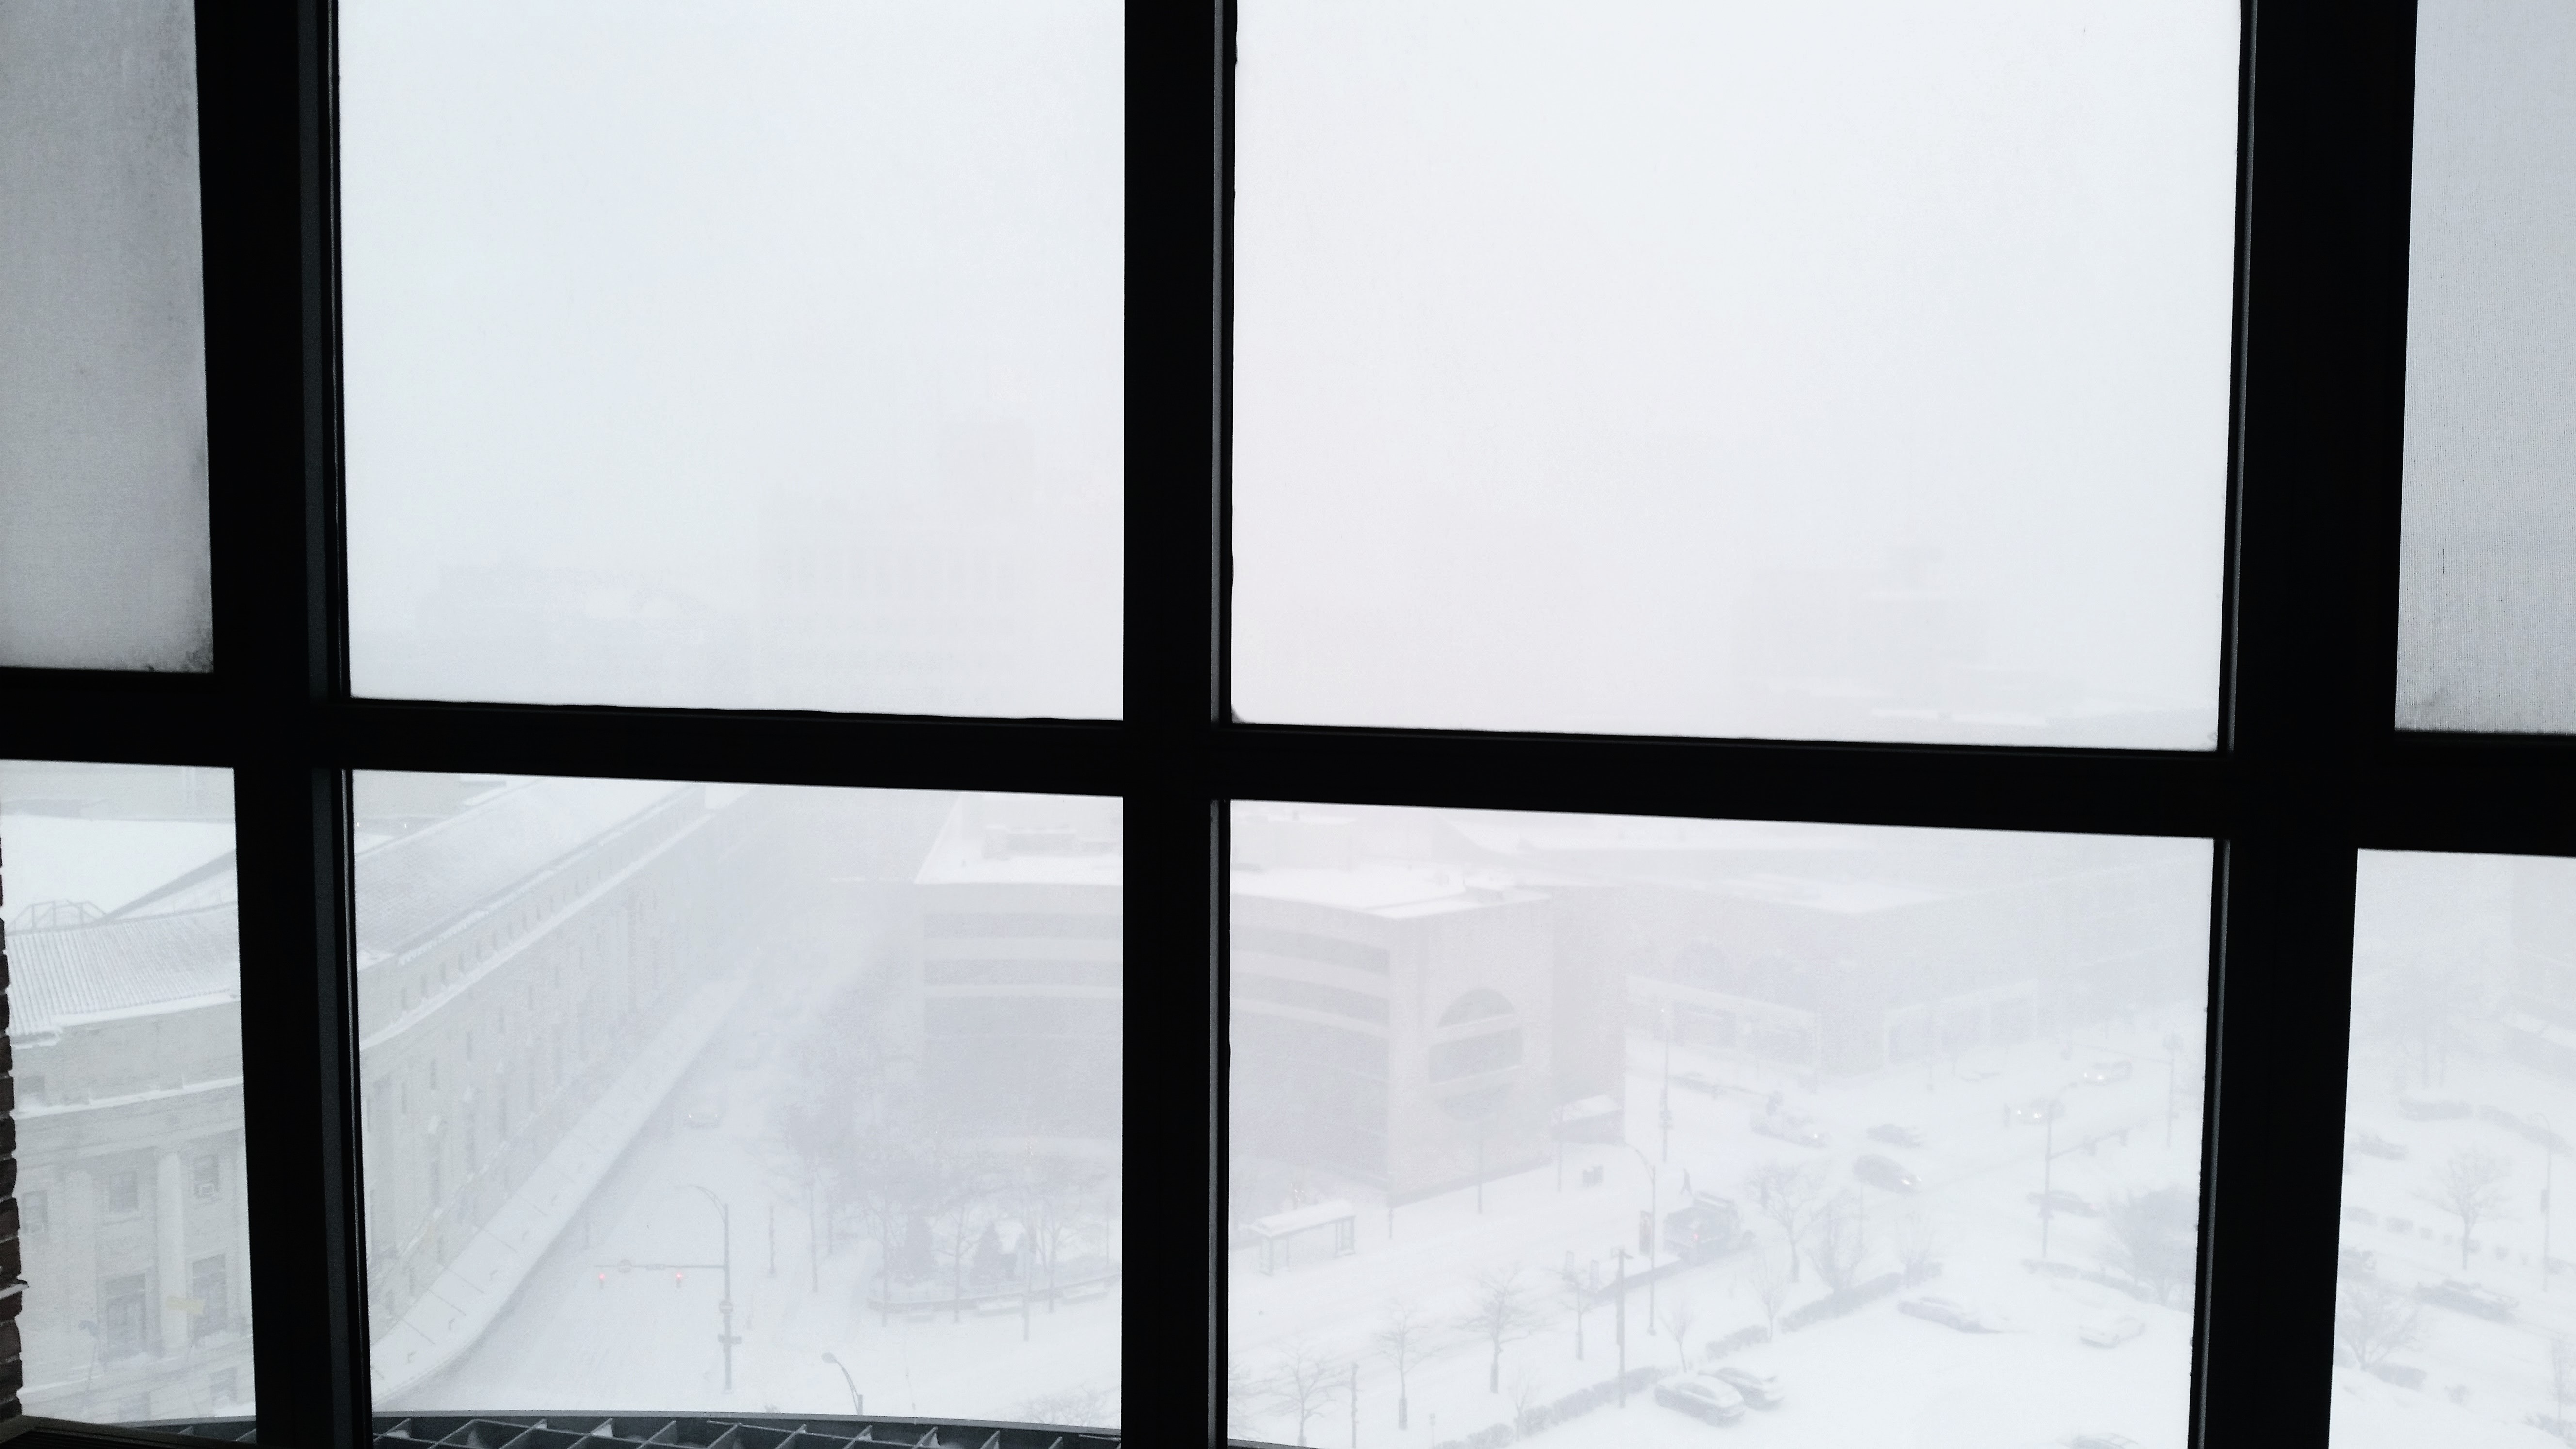 view from a window of eastman theater and surrounding area in a snow white-out